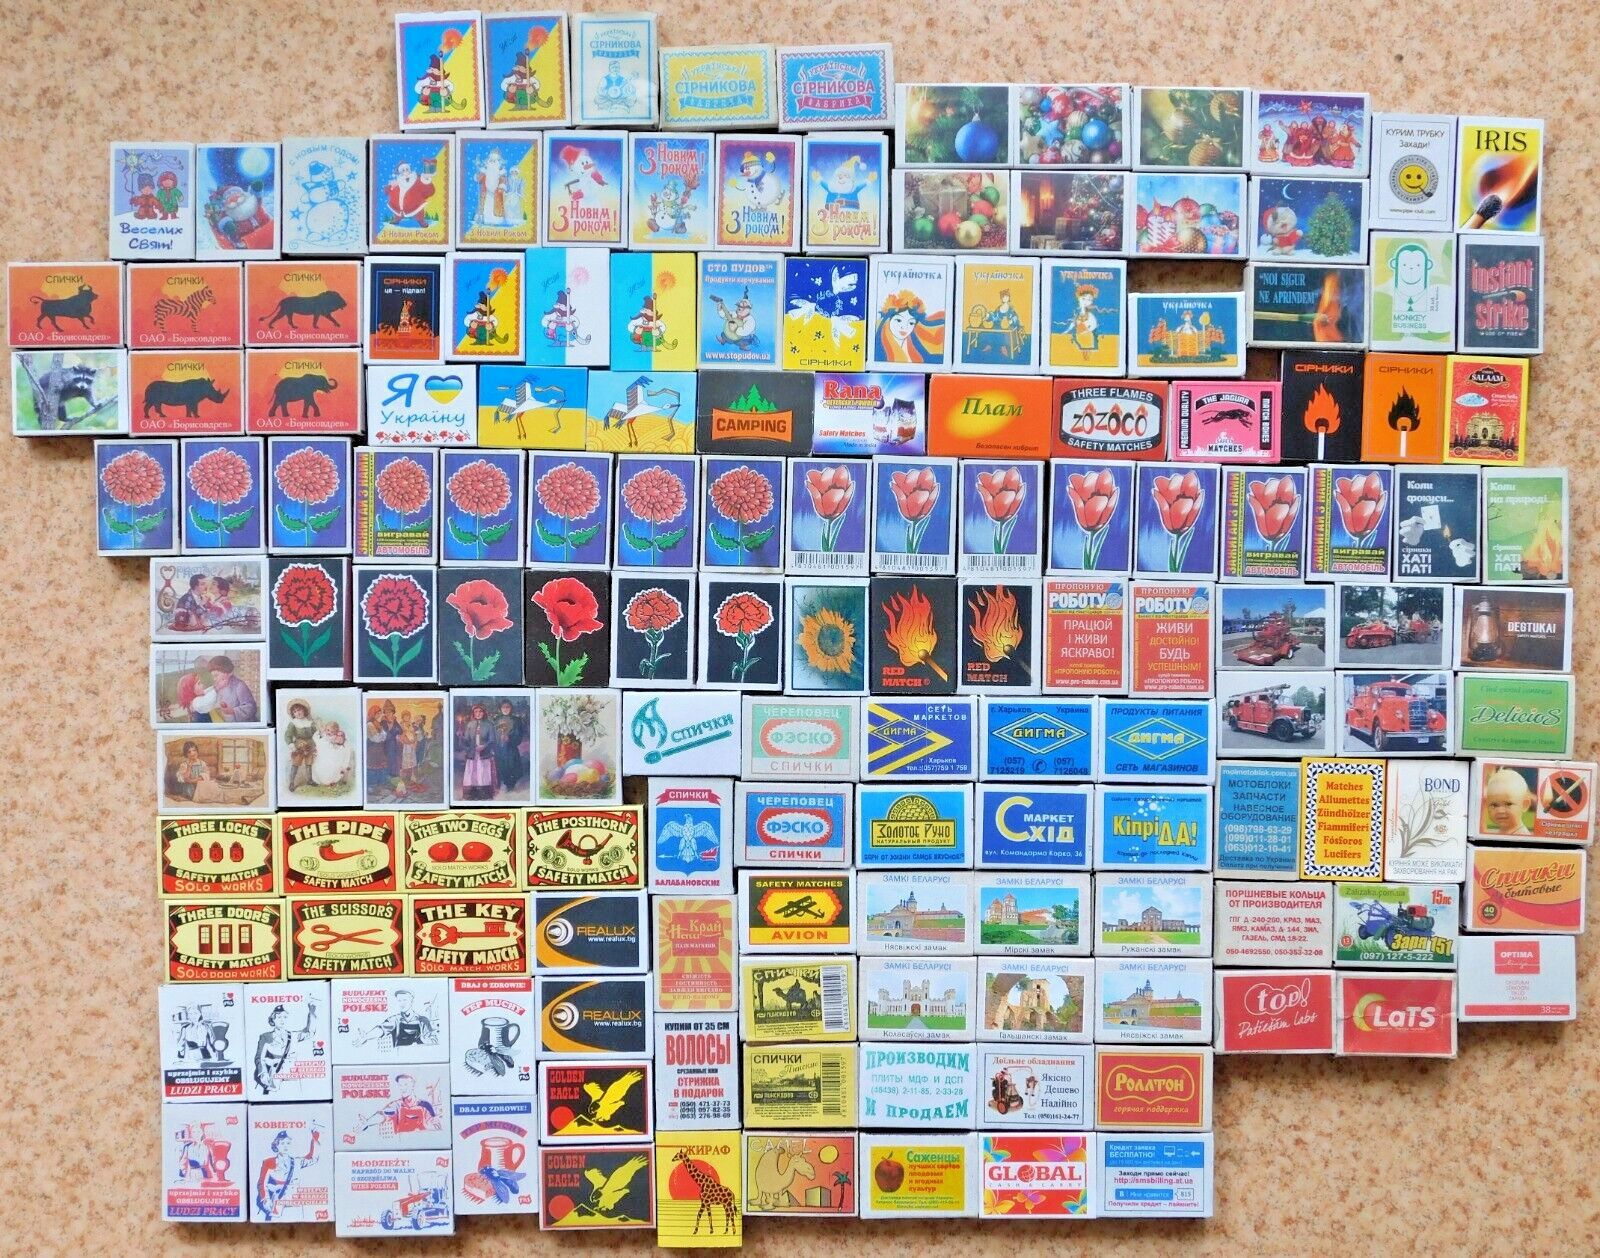 Modern Collection Set Matchboxes Without Matches Inside - 155 pcs.